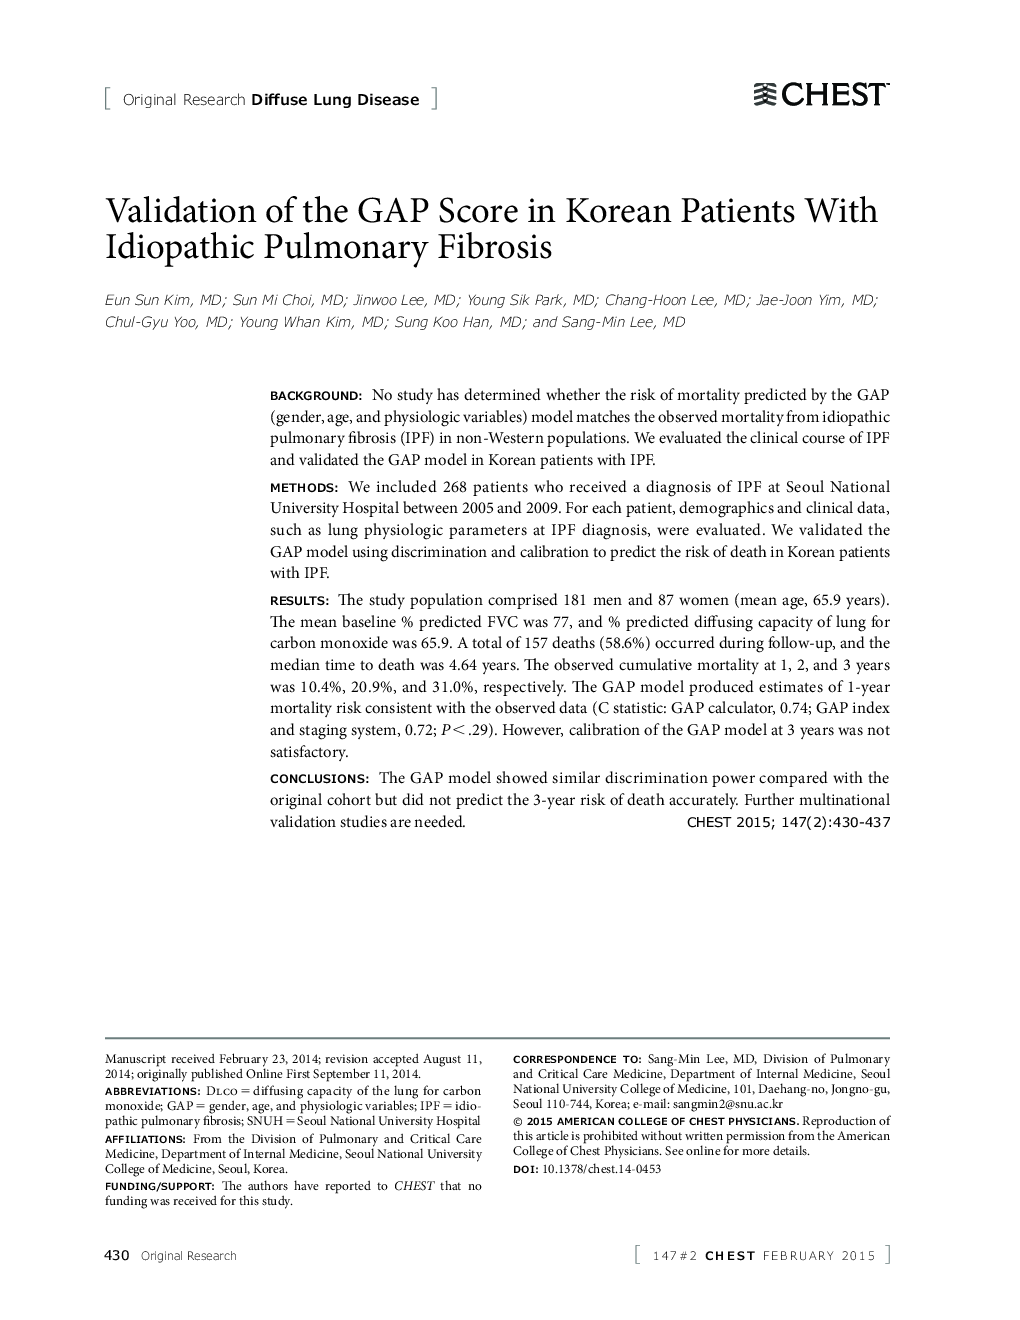 Validation of the GAP Score in Korean Patients With Idiopathic Pulmonary Fibrosis